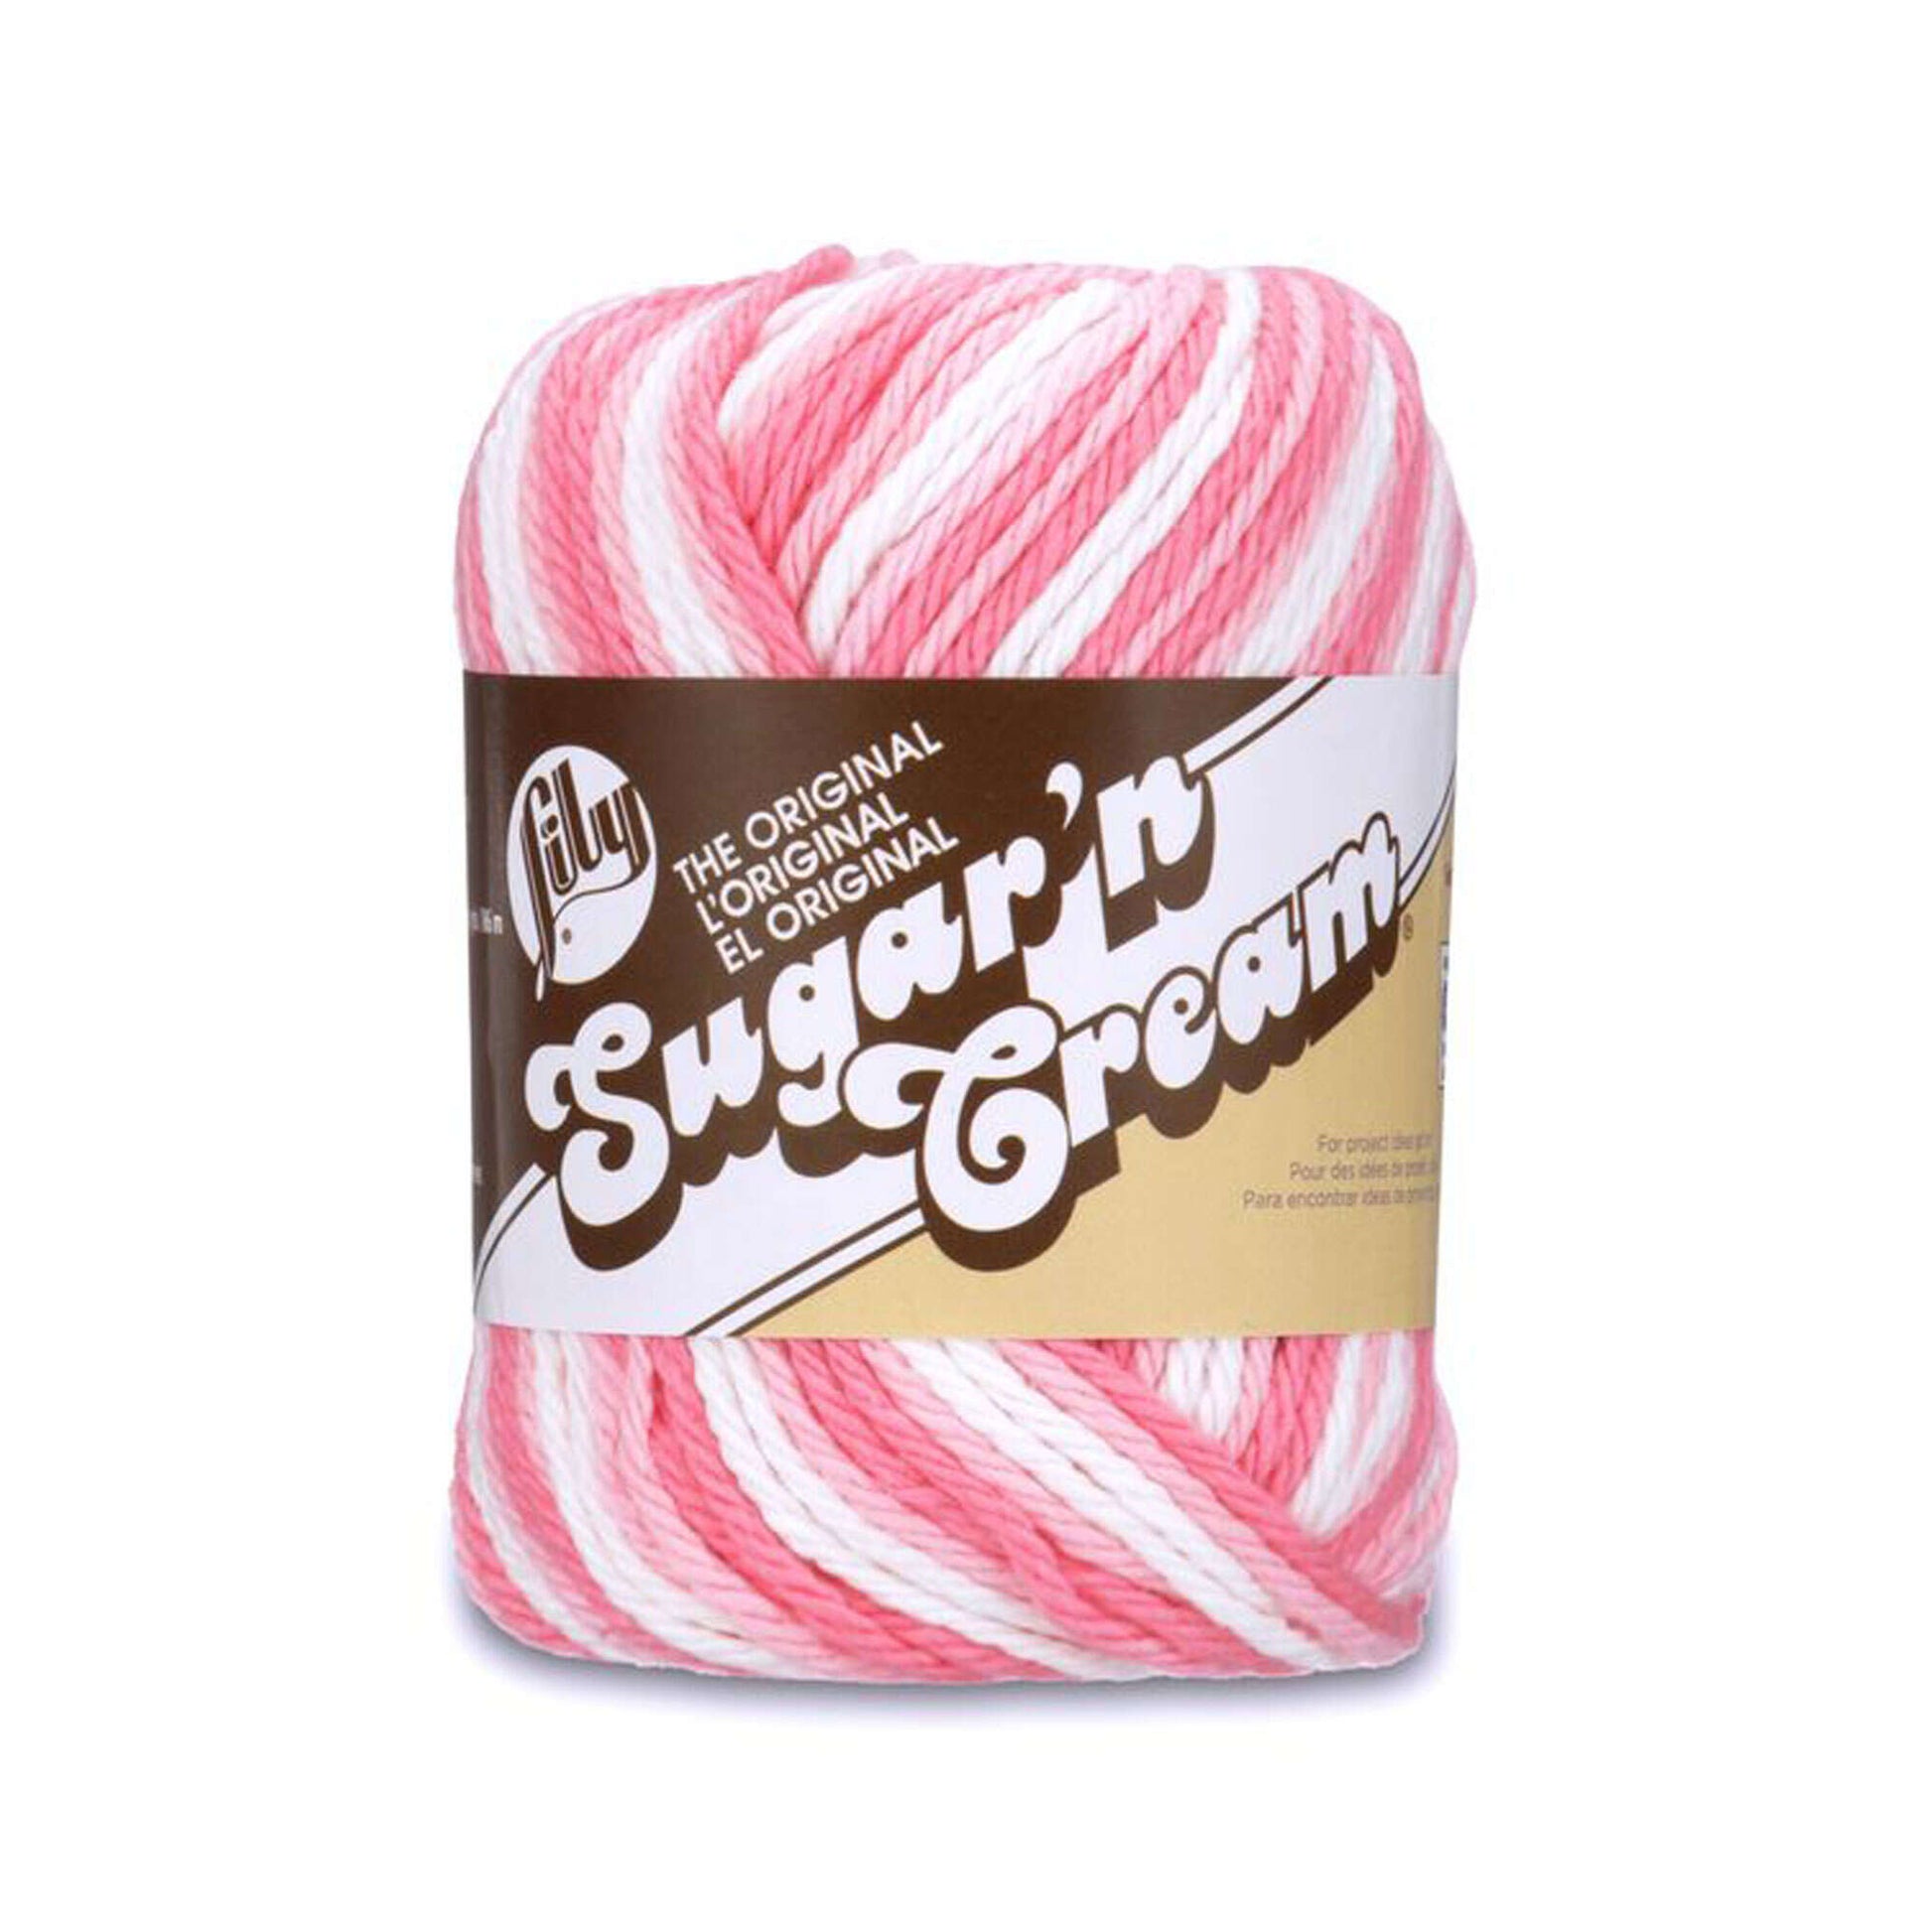 Lily Sugar'n Cream Yarn - Ombres Super Size-Over The Rainbow, 1 count -  Kroger